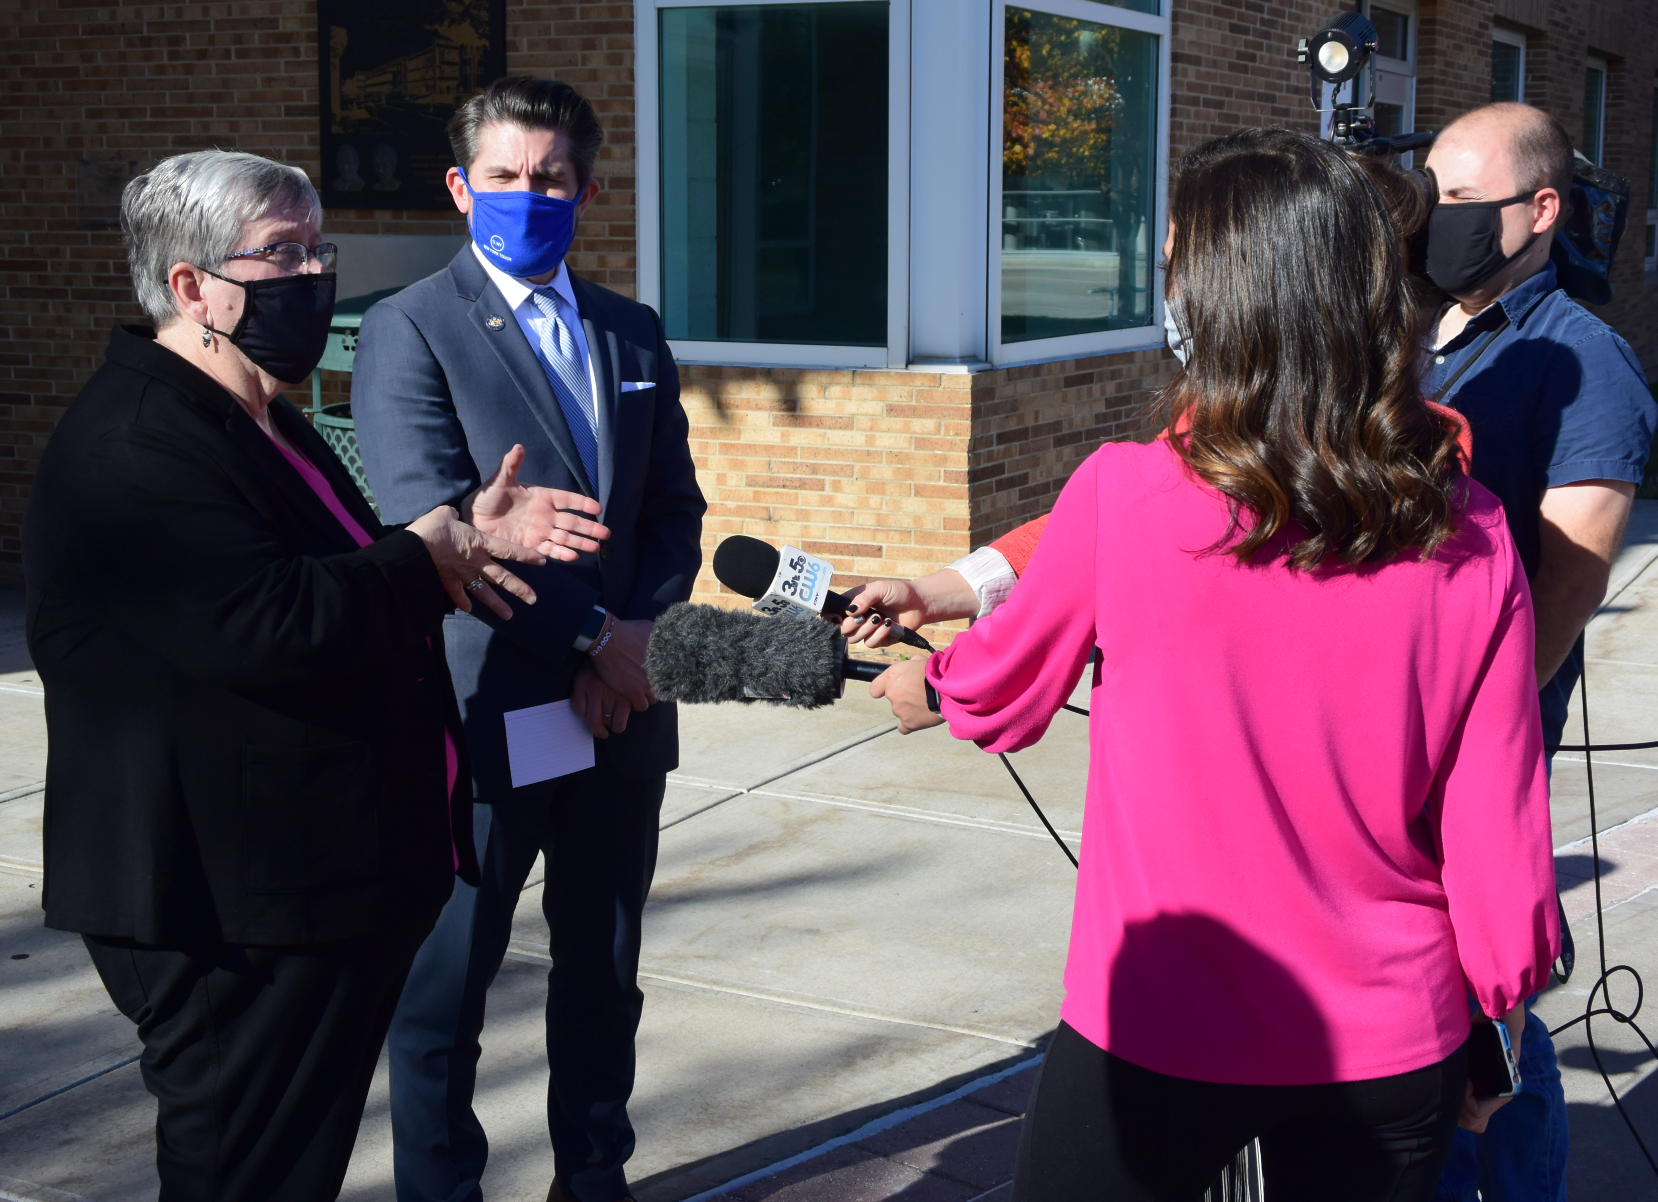 OCC President Dr. Casey Crabill (left) and SUNY Chancellor Dr. Jim Malatras (right) speak with the media outside the Whitney Applied Technology Center.